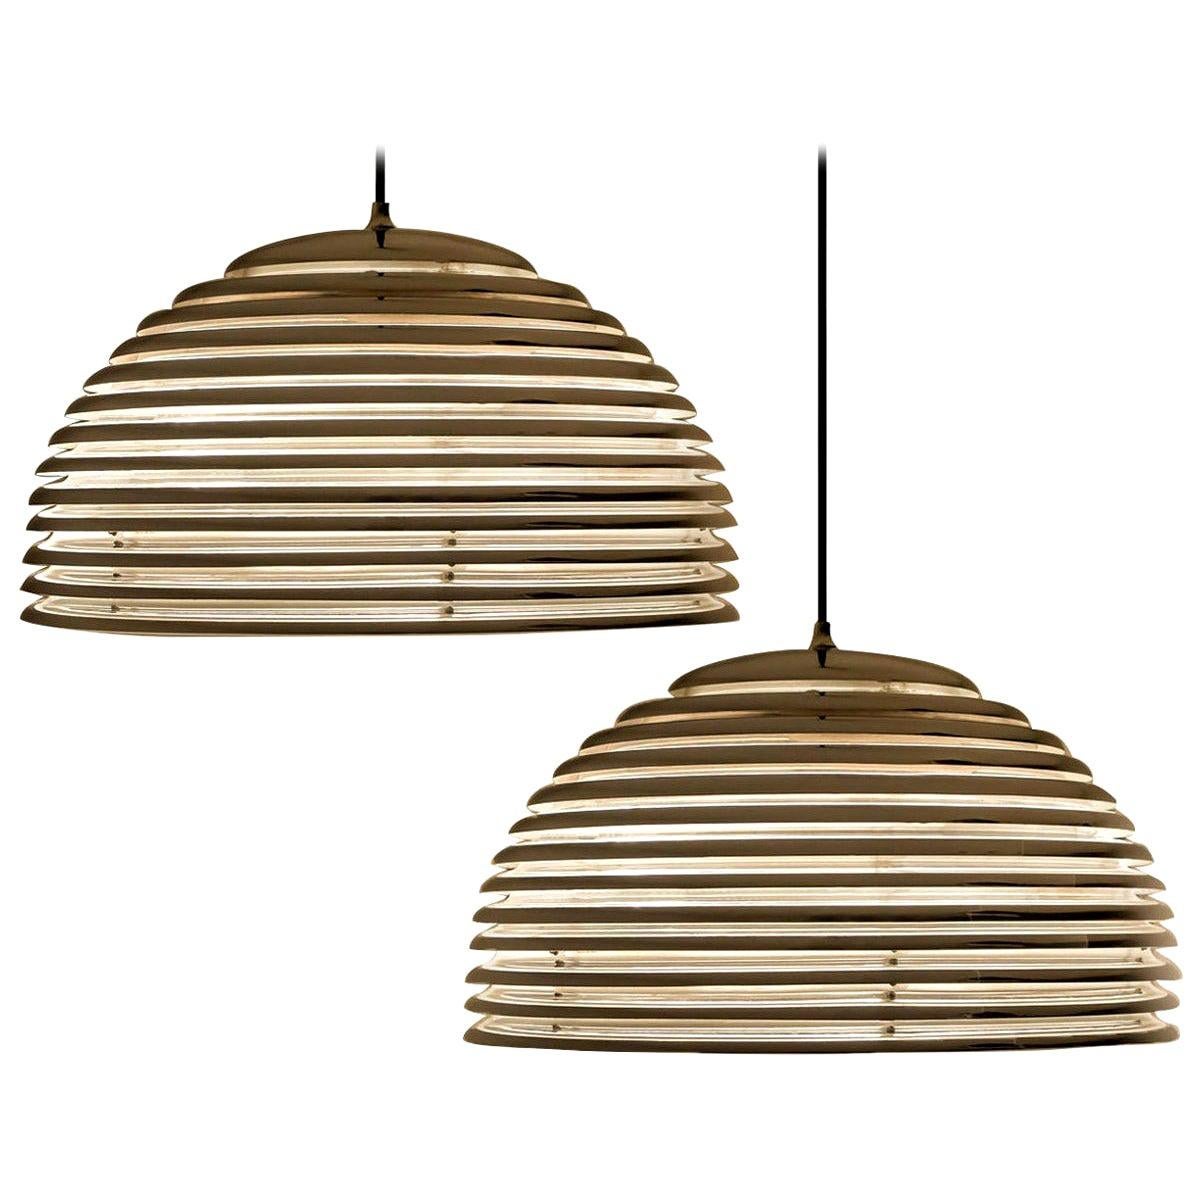 Pair of Large Saturno Hanging Lamps by Kazuo Motozawa, 1972 For Sale